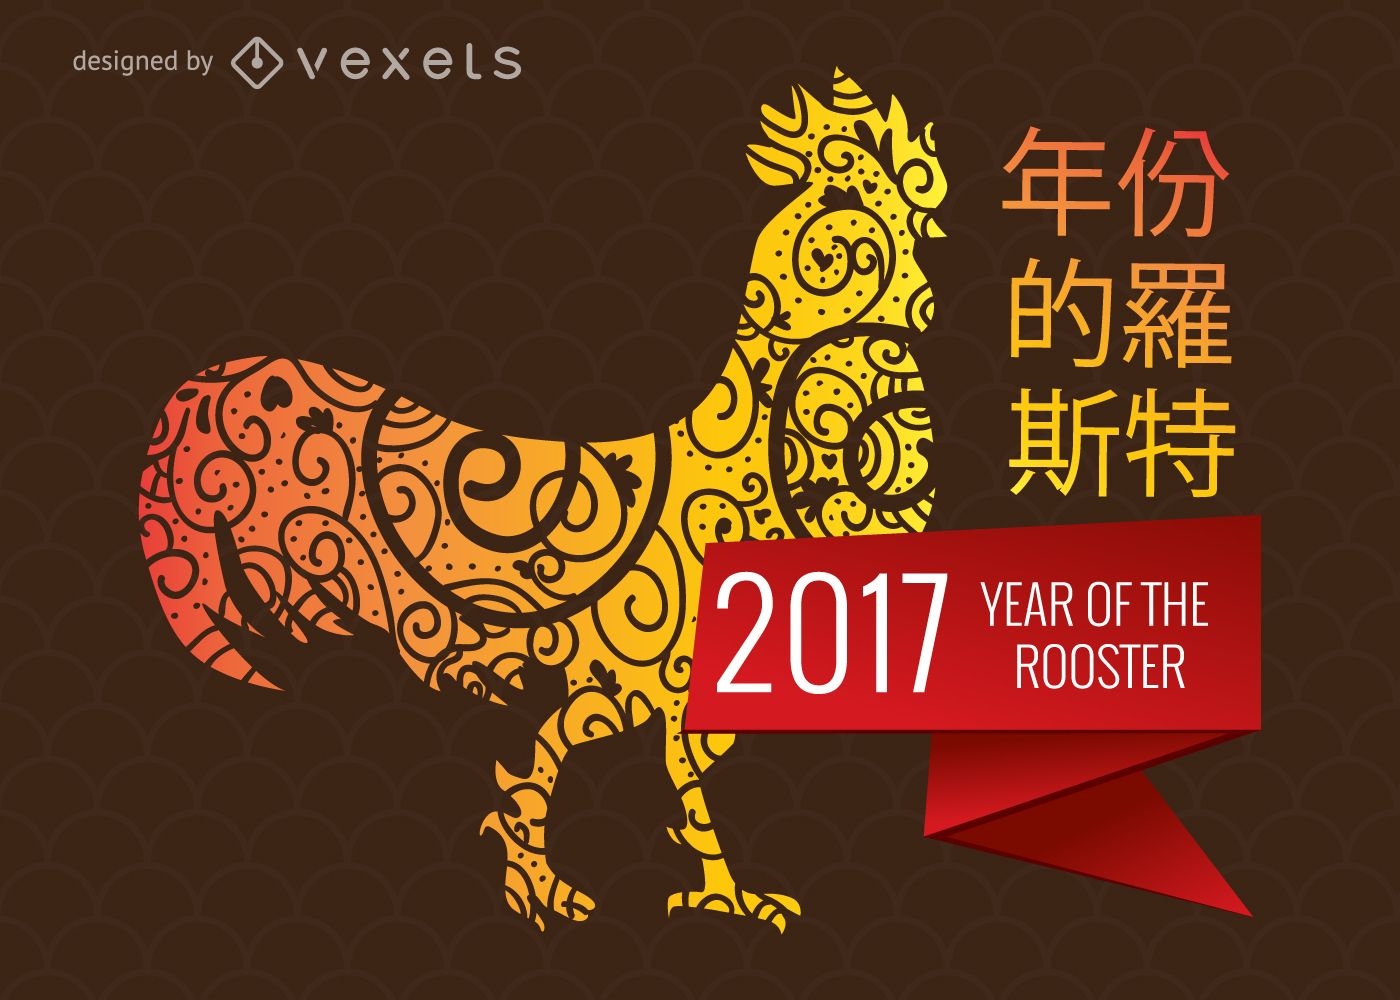 2017 Year of the Rooster design